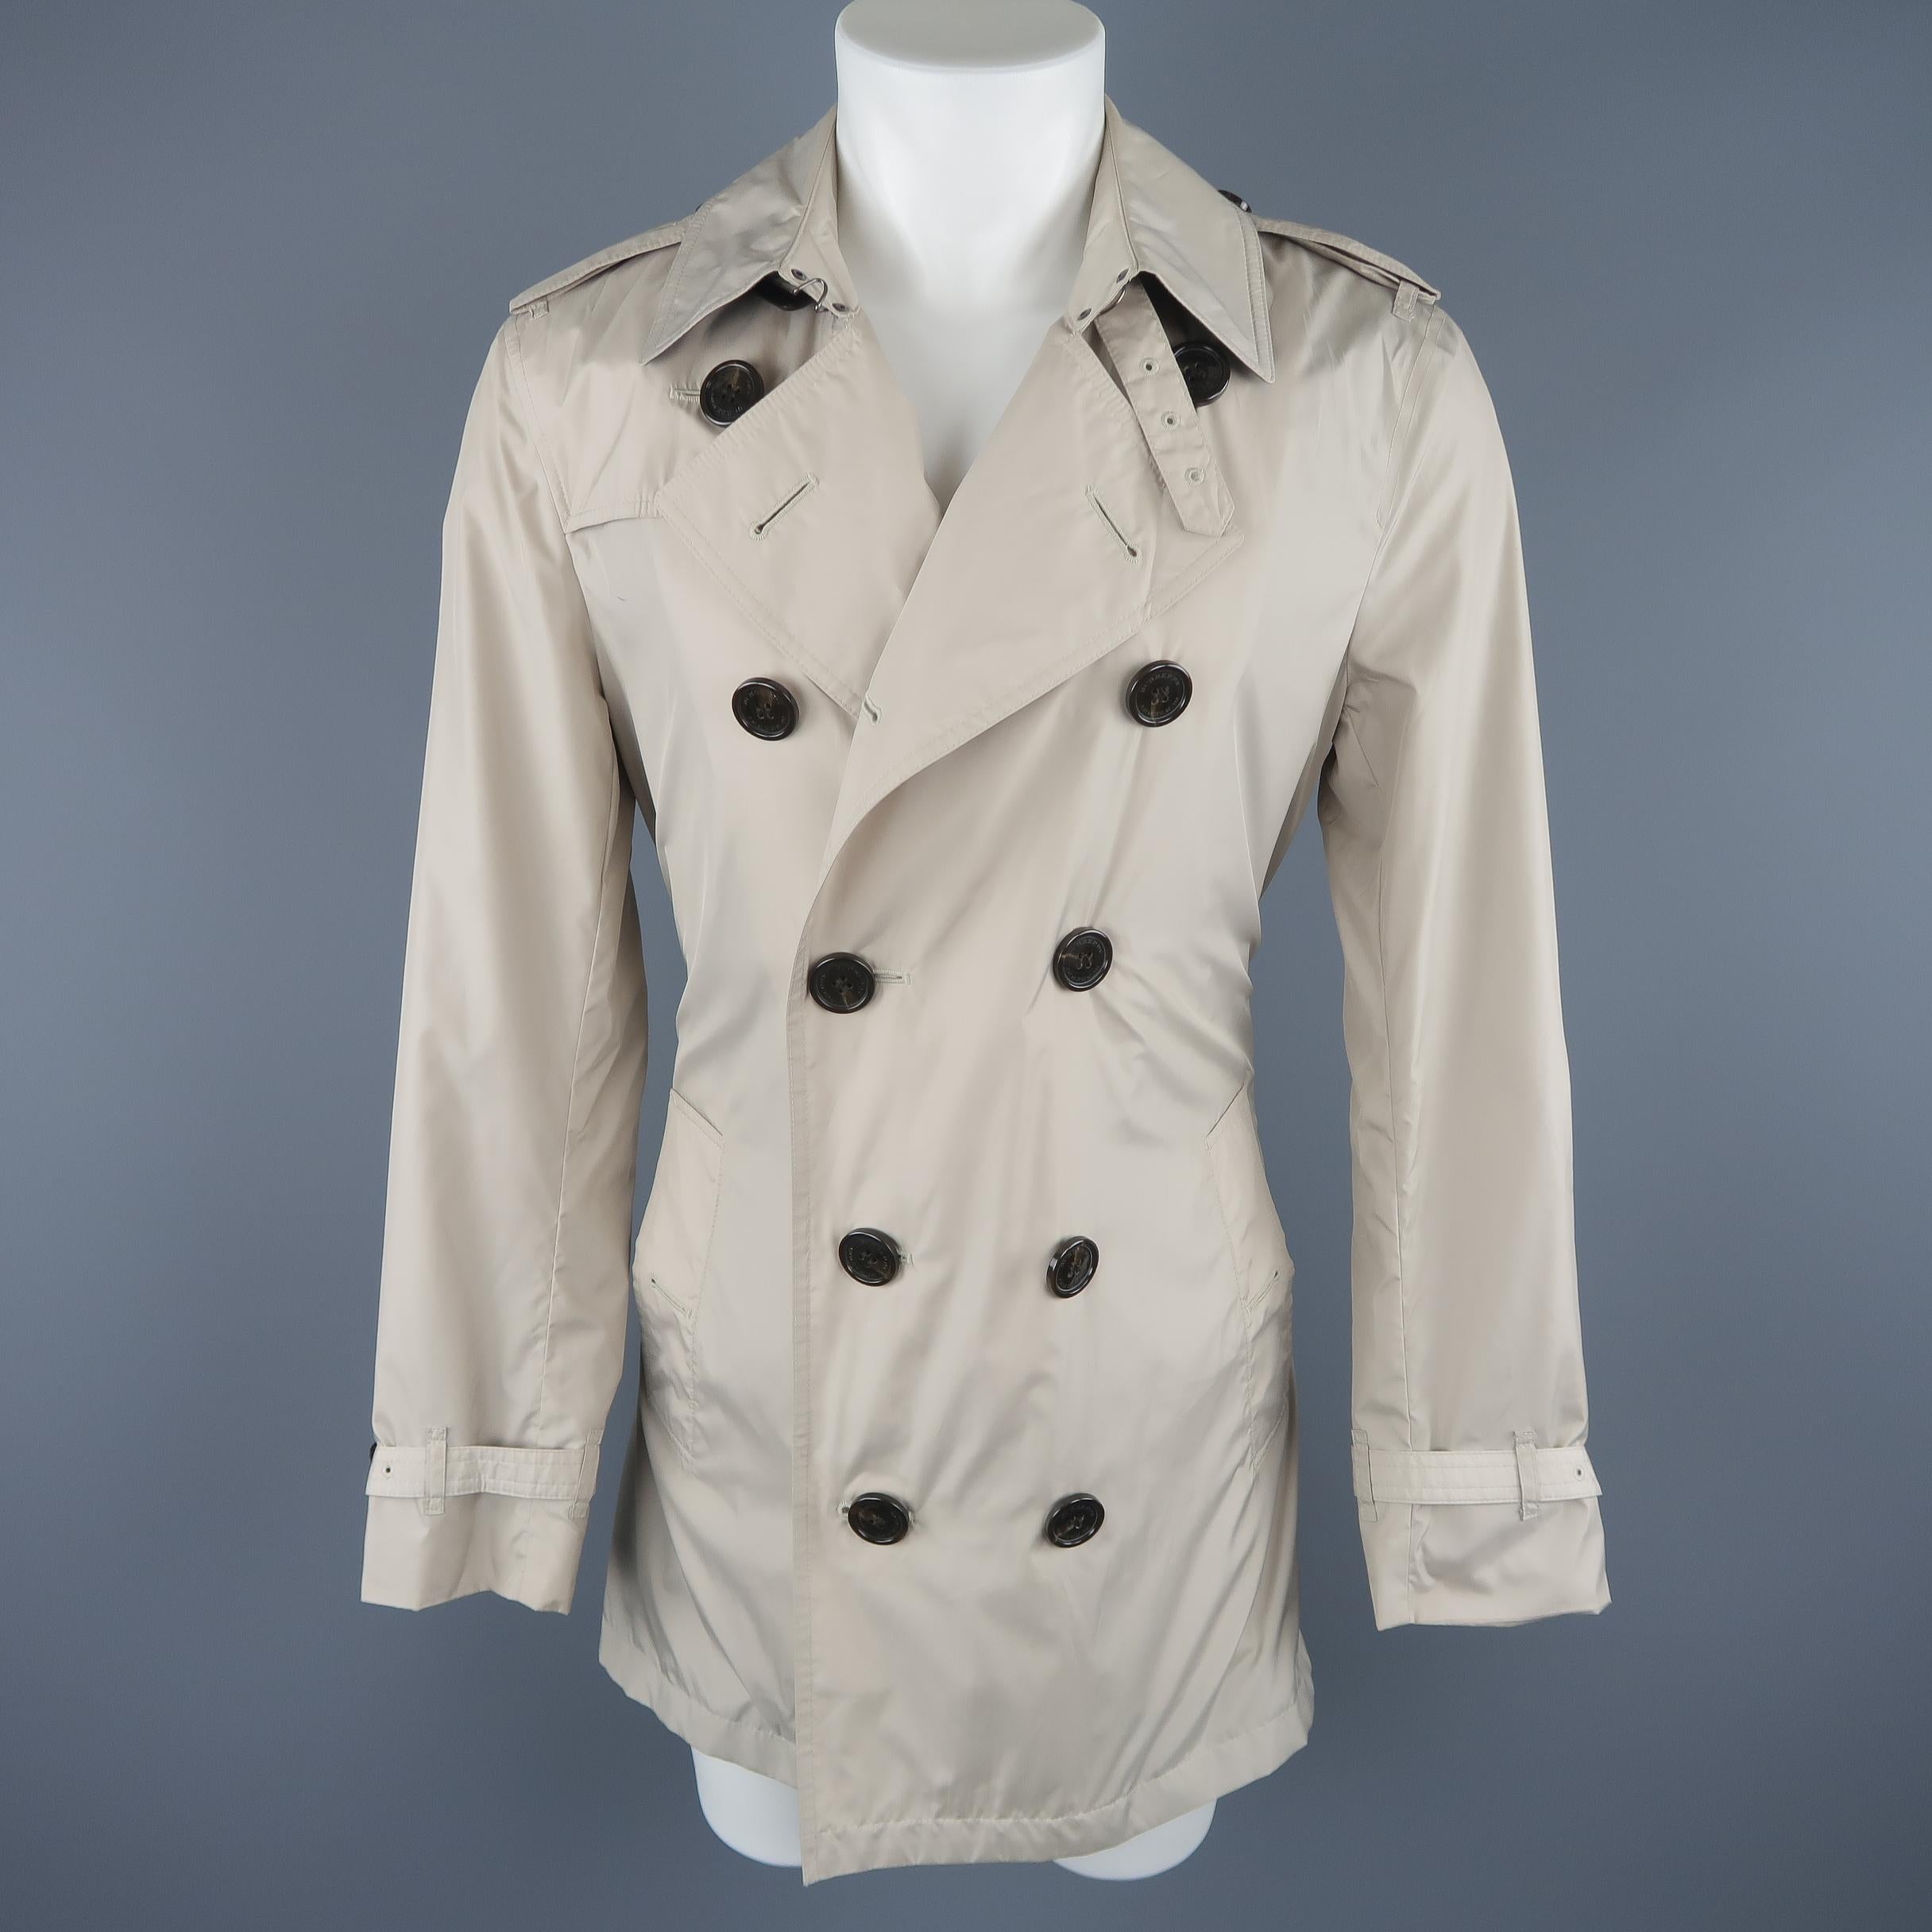 Burberry London trench coat comes in light khaki windbreaker material with a plaid lined pointed collar, storm flap, double breasted button up closure, belted waist, epaulets, and belted cuffs. Stains shown in detail shots .As-is. With garment bag.
